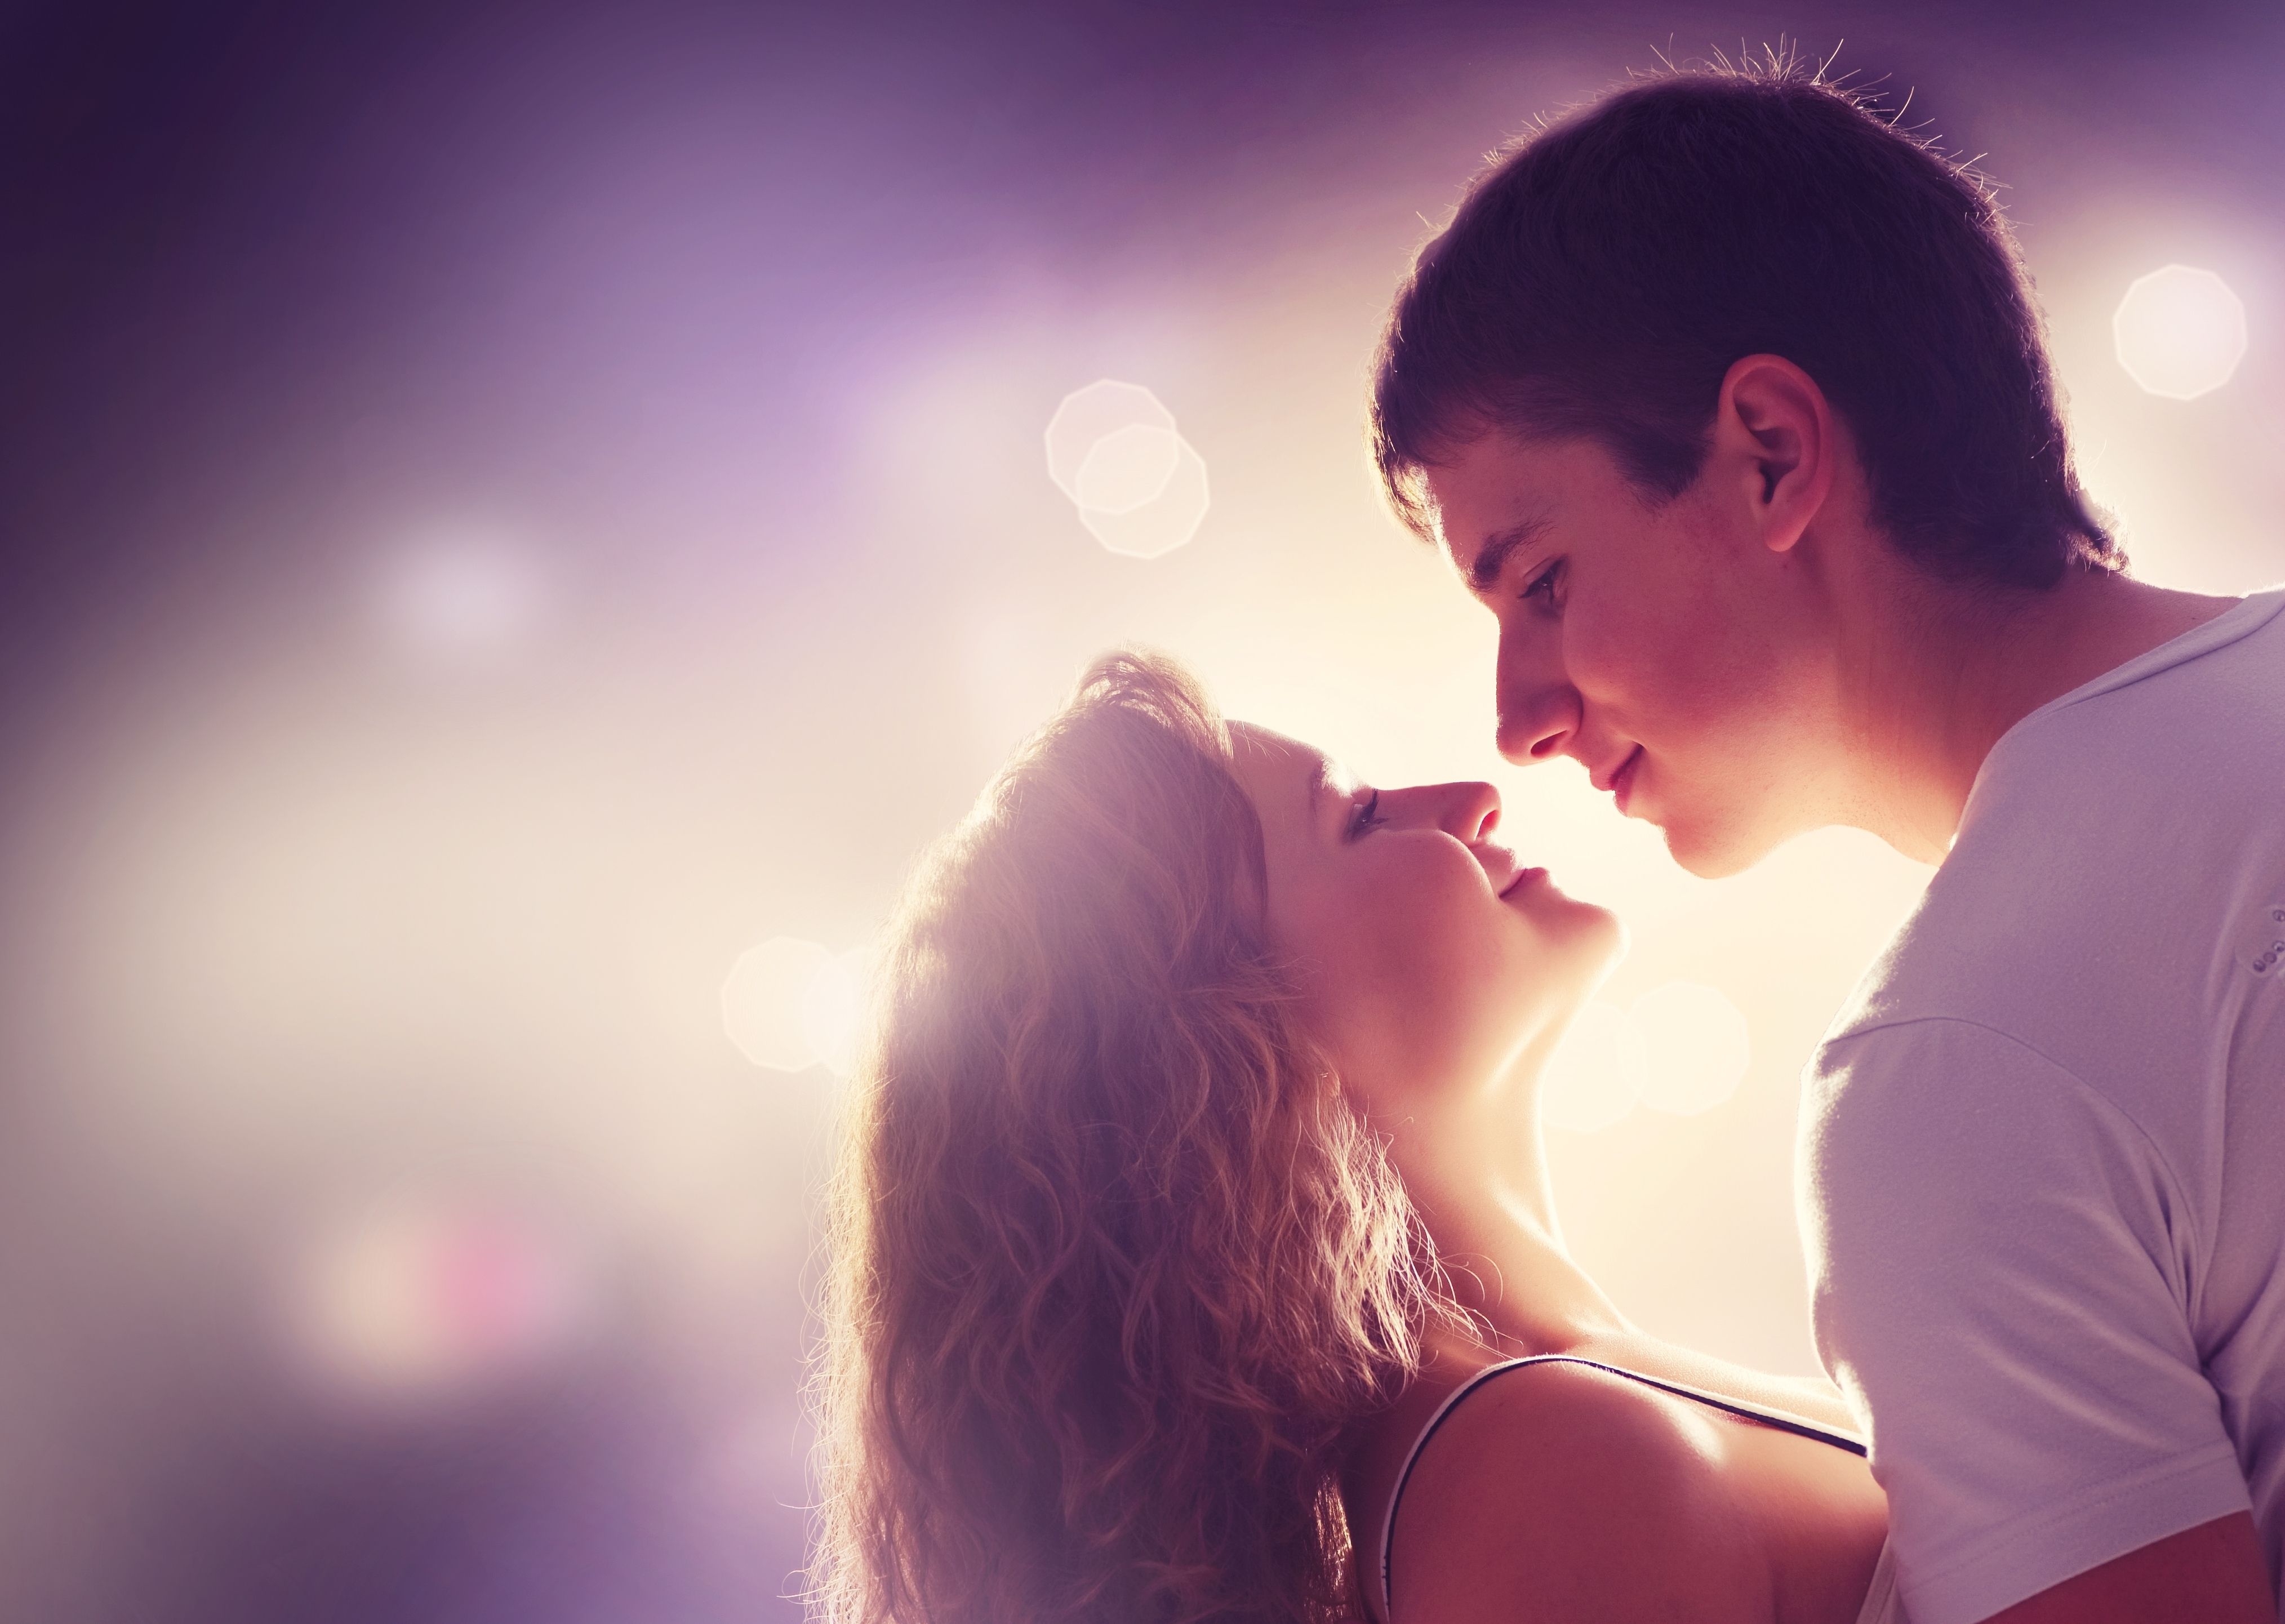 Cute couple, Guy, Girl in love, lovers wallpapers and images ...